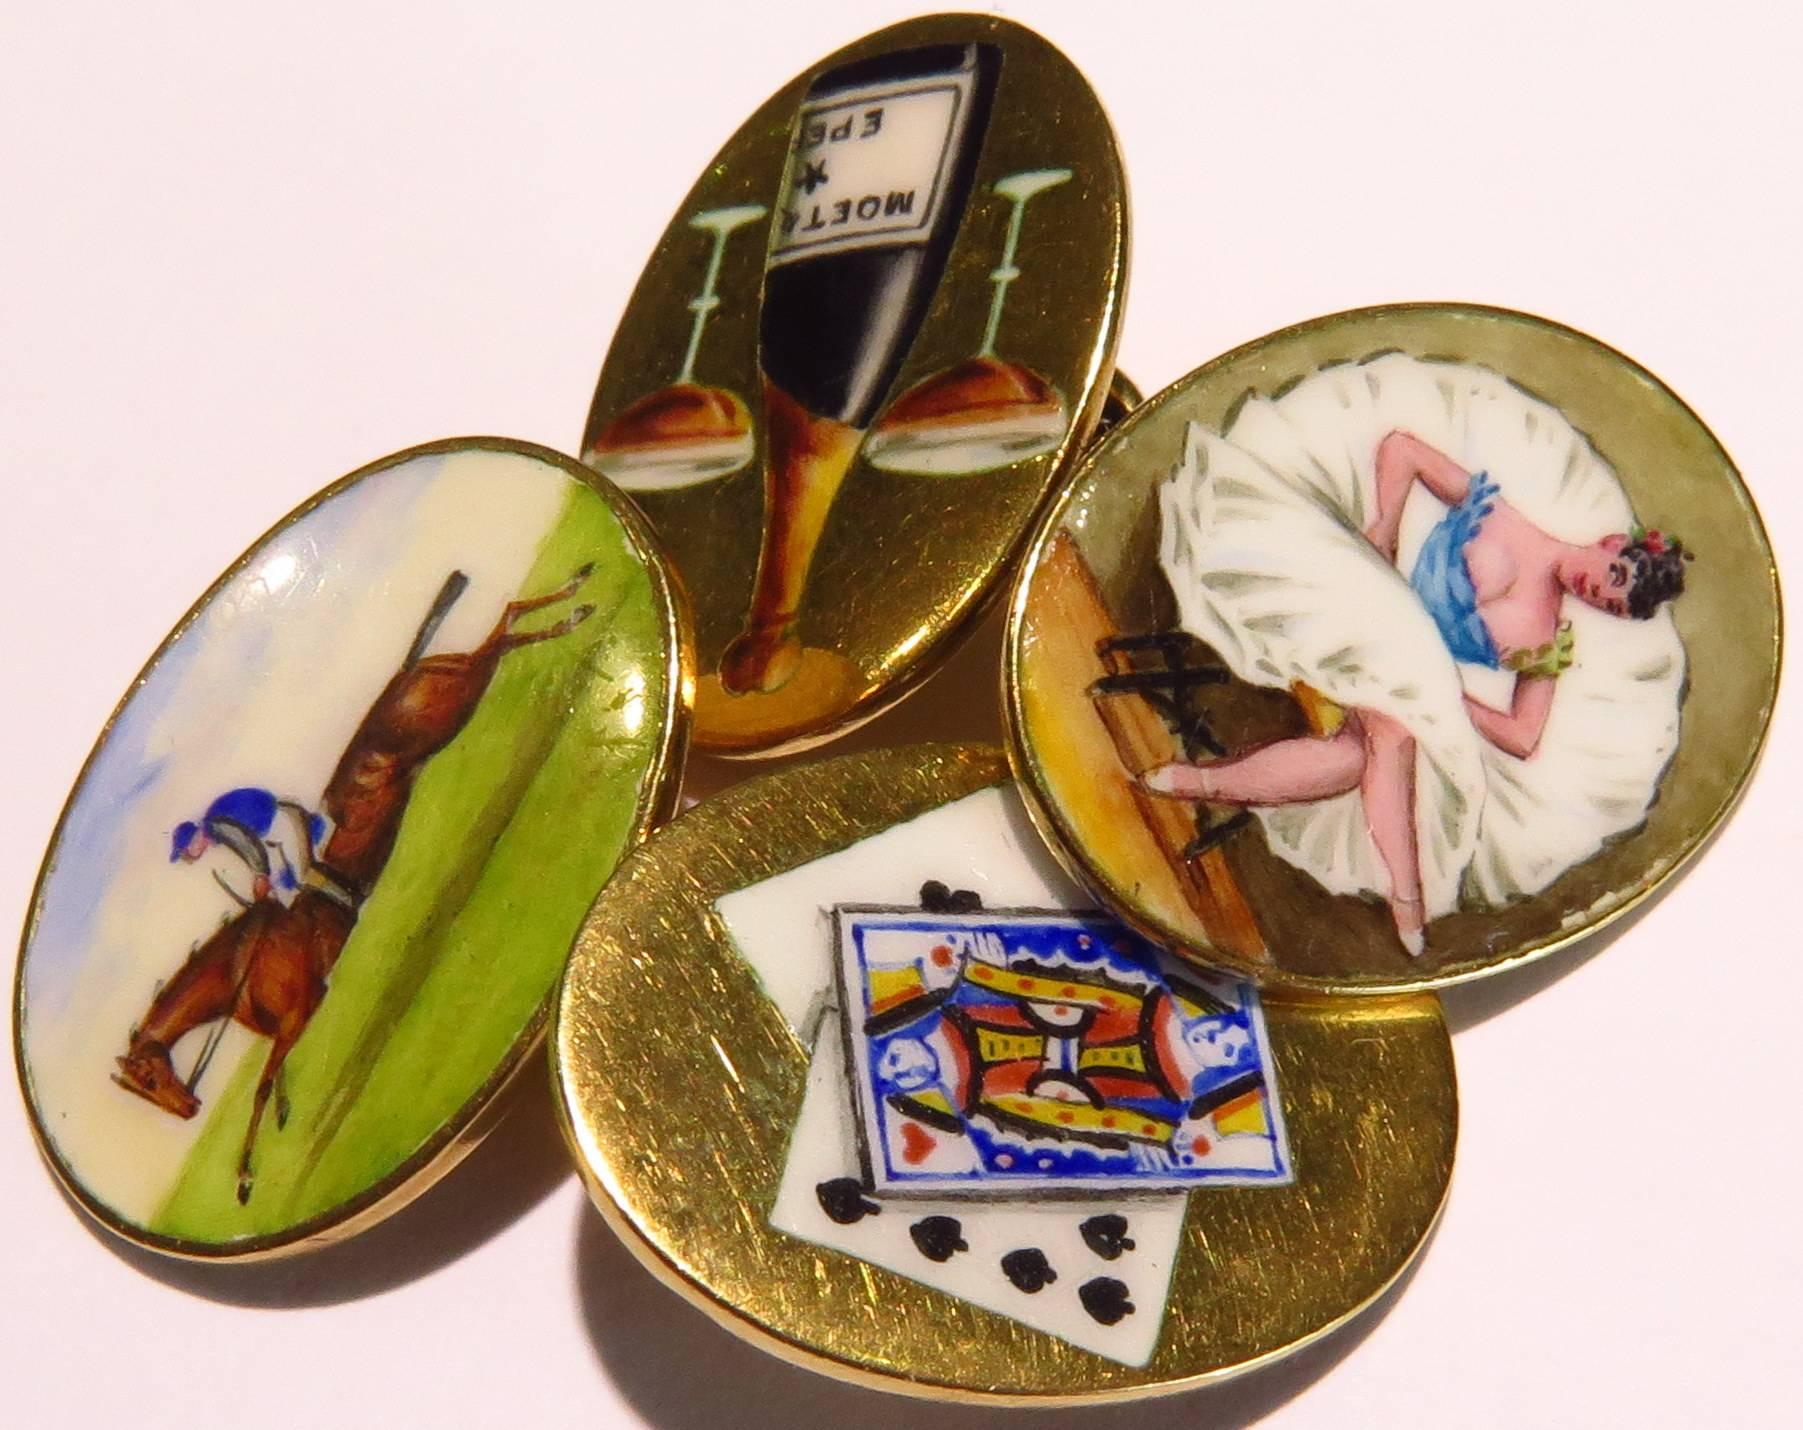 These are the best of the best when it comes to 4 Vices cufflinks!
They are true art deco from Birmingham England and signed WJH (William James Holmes). The enamel has no chips at all. But it does have some very faint scratches, all minor, due to